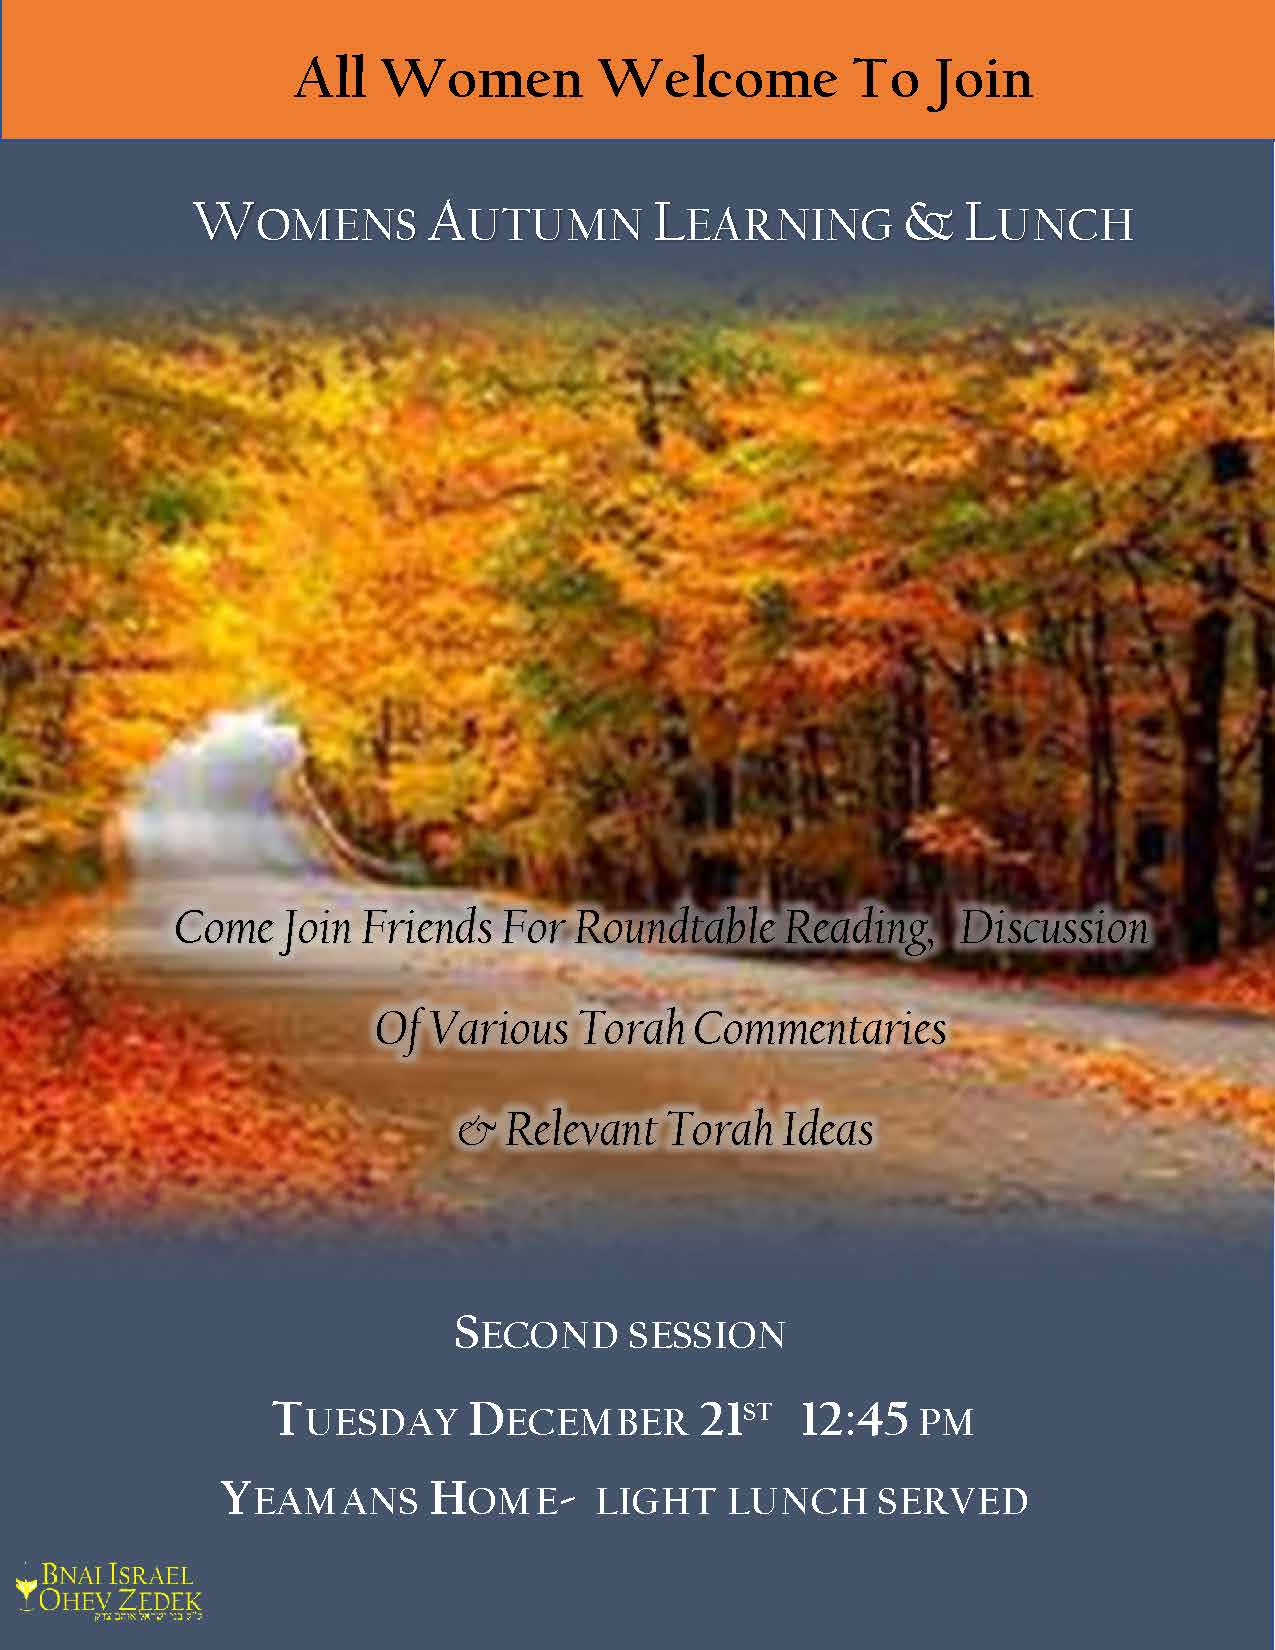 Women's Autumn Learning Session